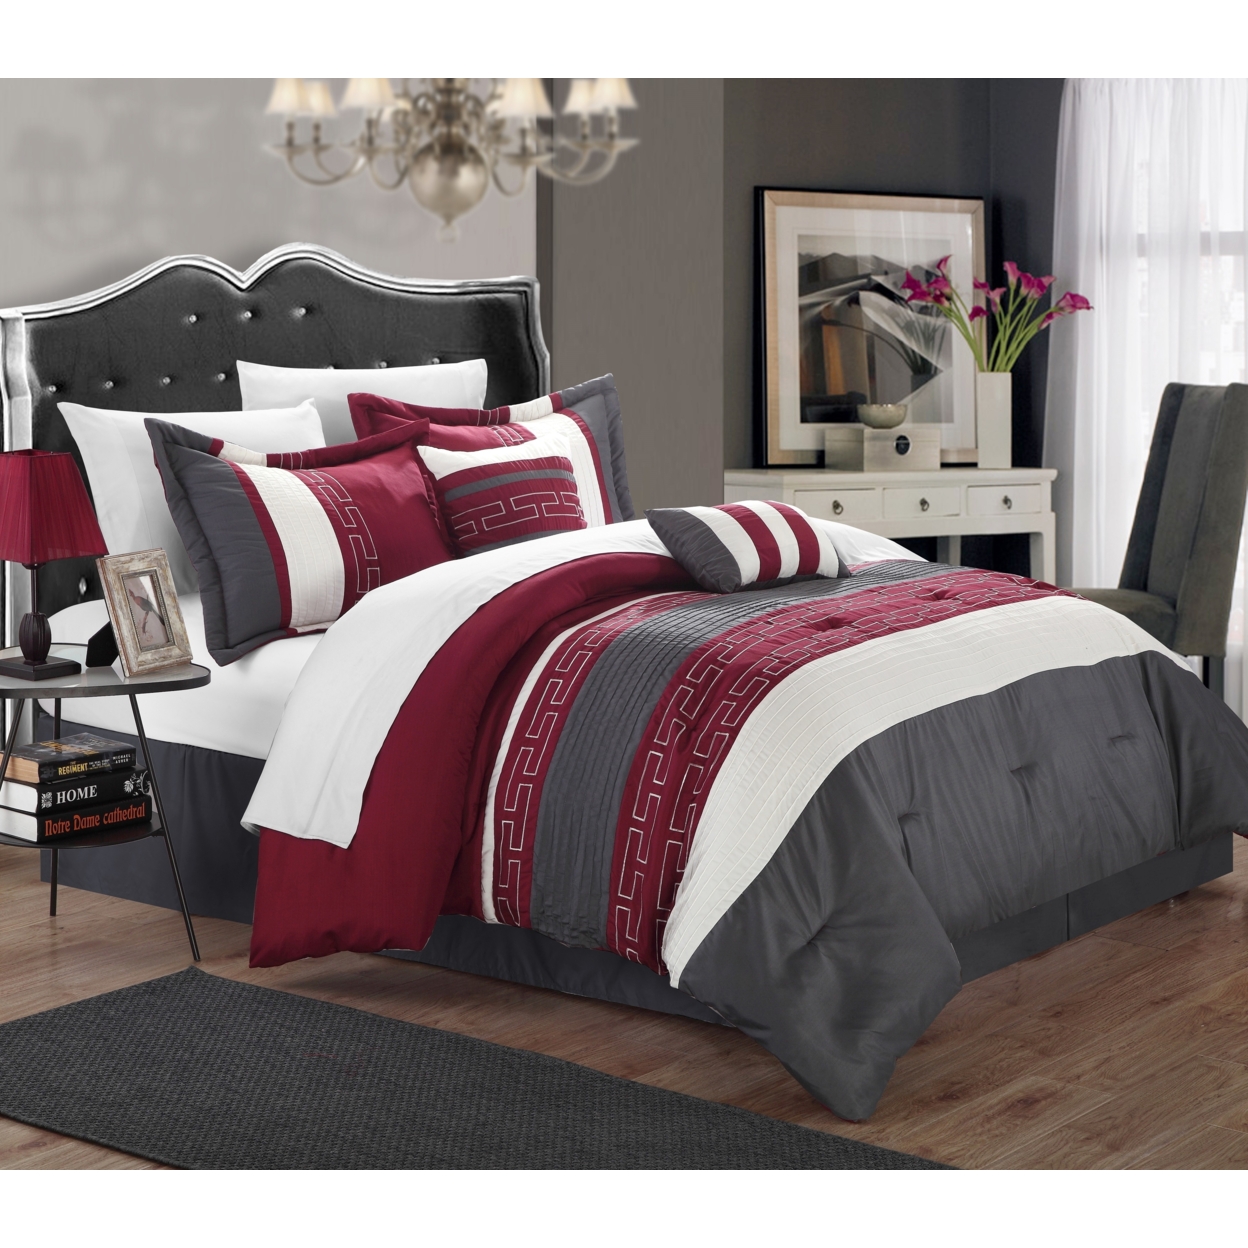 Chic Home Coralie 6-piece Comforter Set Hotel Collection - Black, Queen